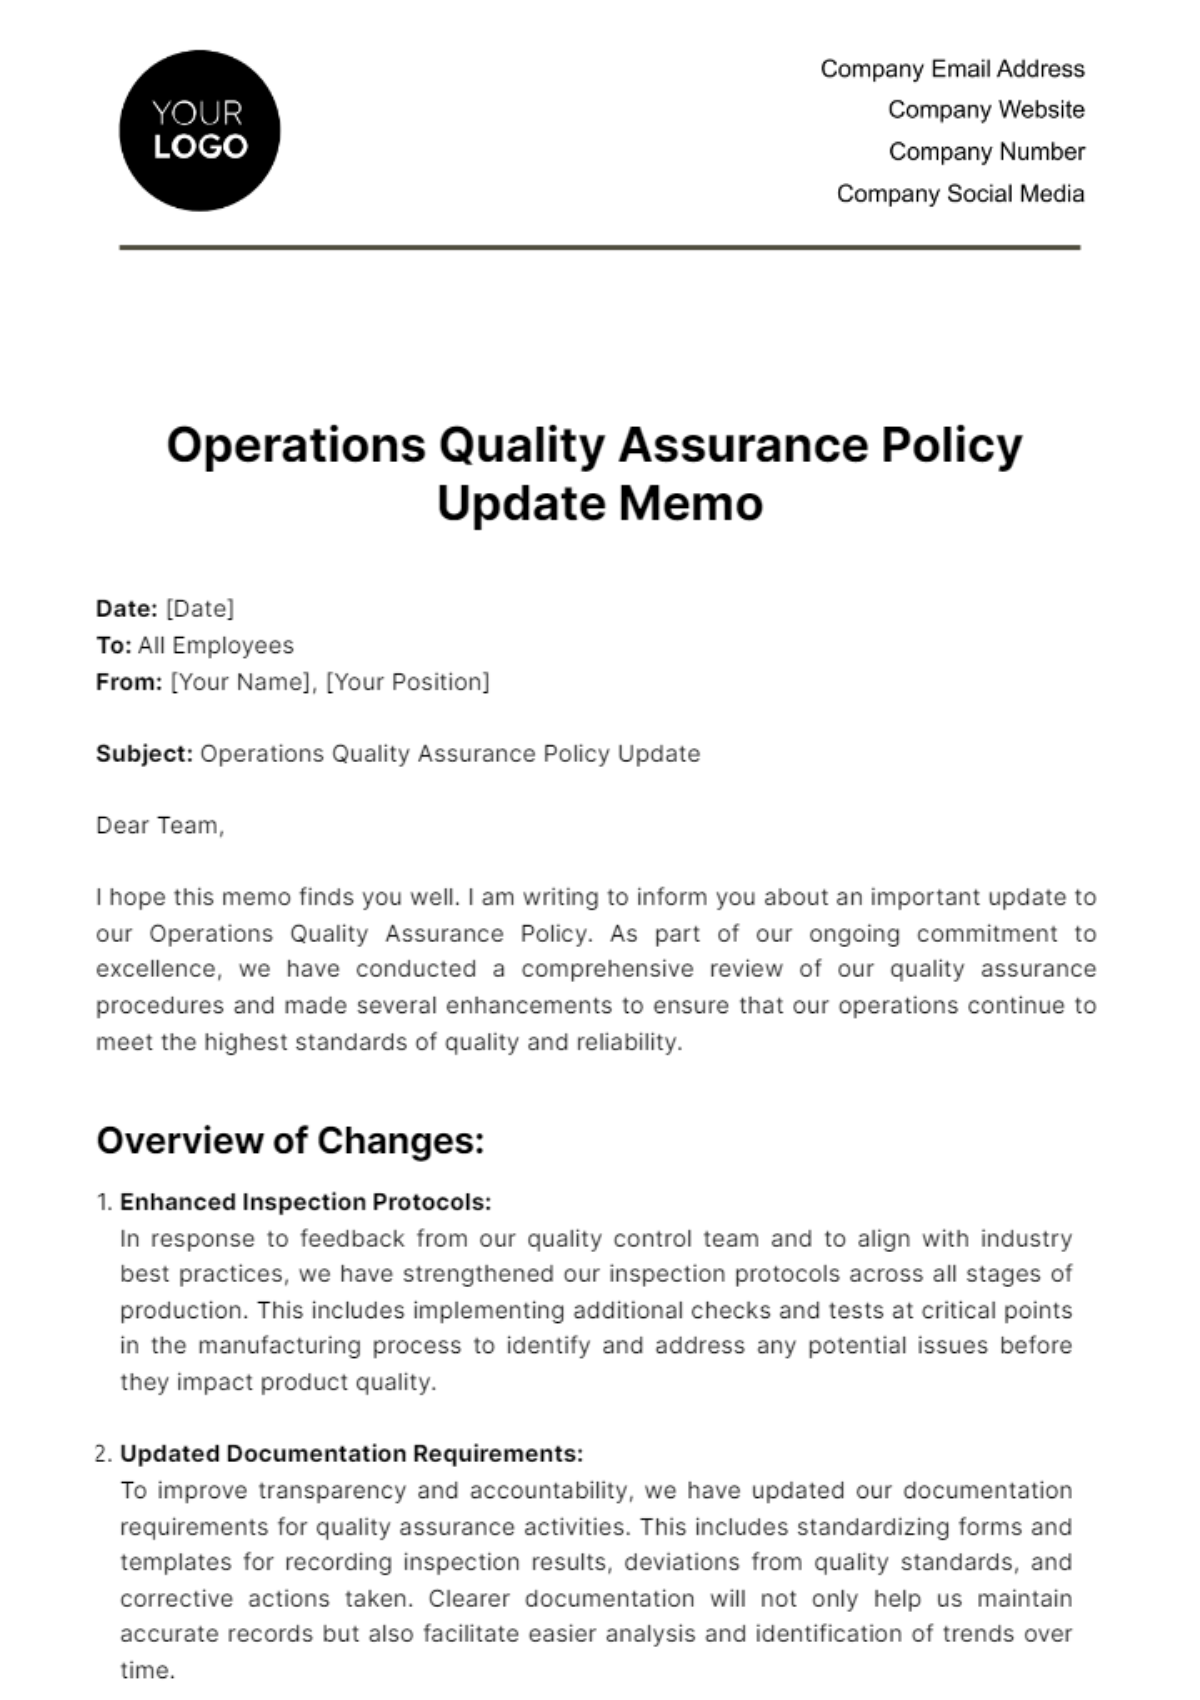 Operations Quality Assurance Policy Update Memo Template